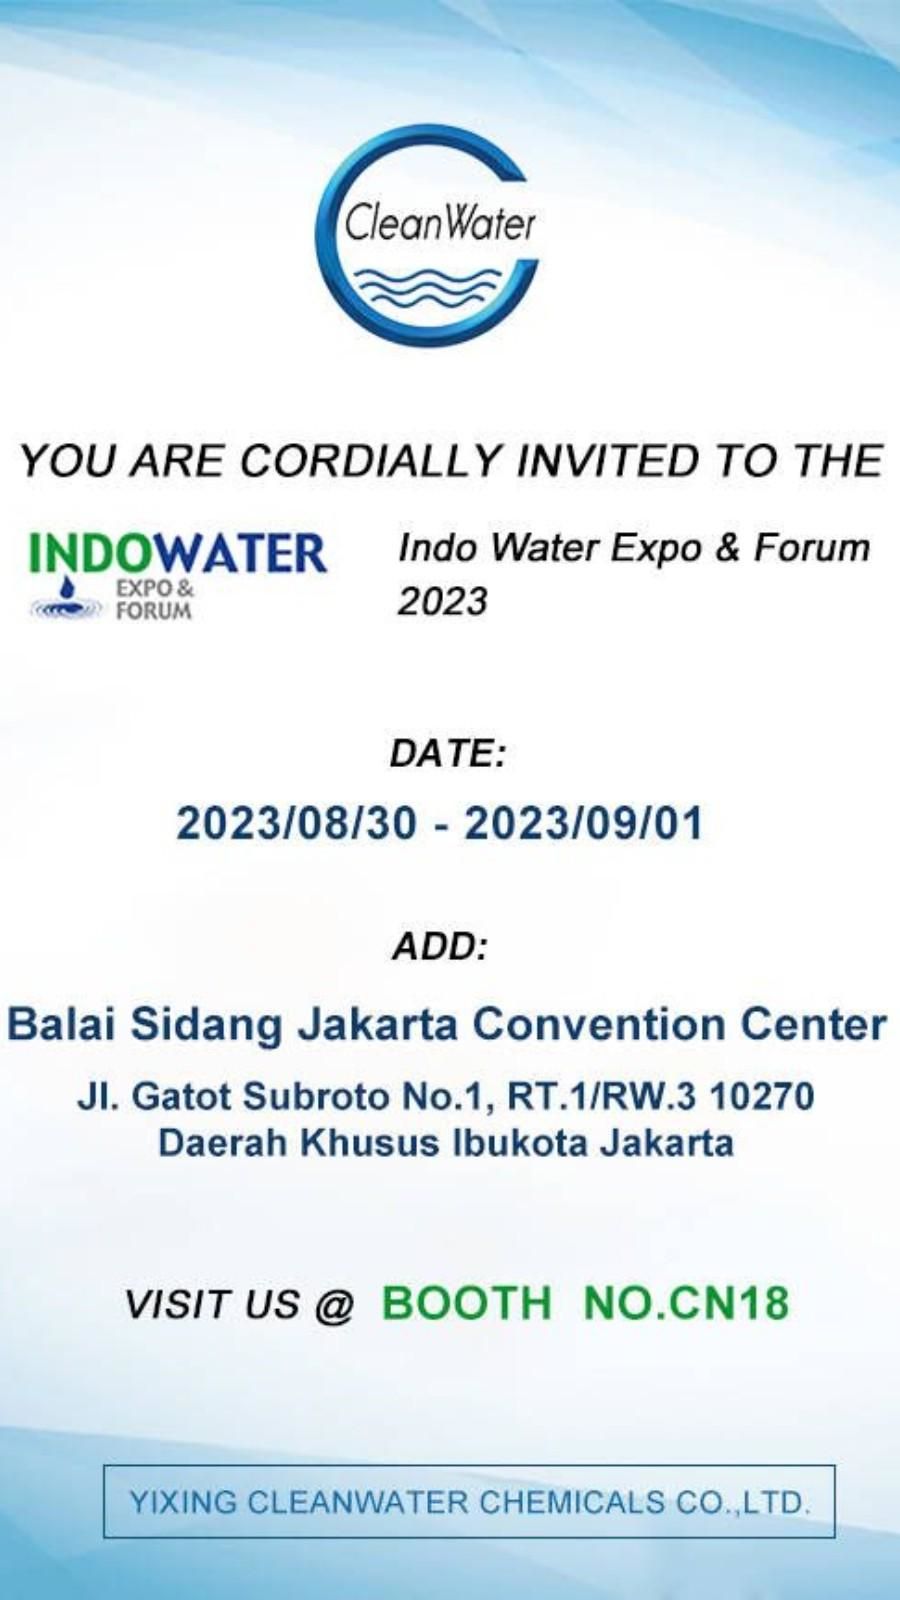 Indo Water Expo & Forum is coming soon